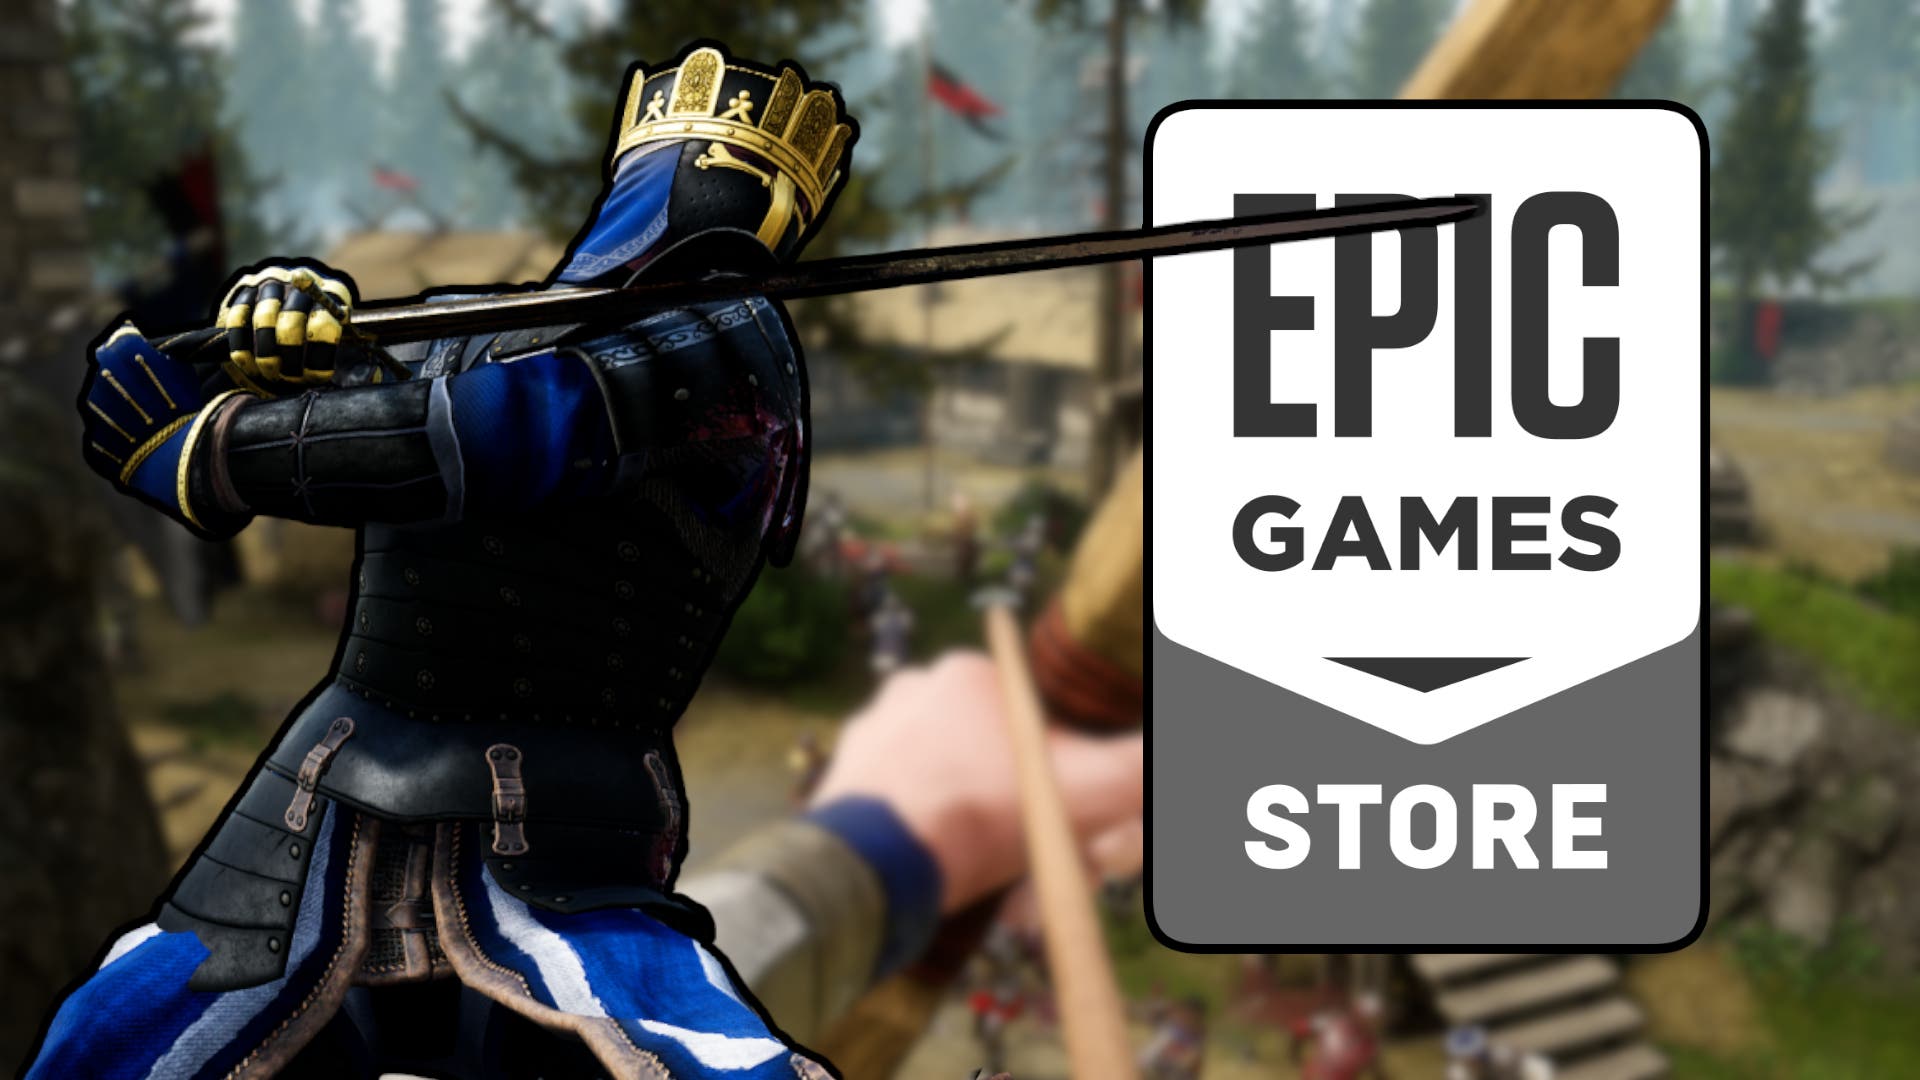 Download Mordhau and Second Extinction for free from the Epic Games Store (April 13)